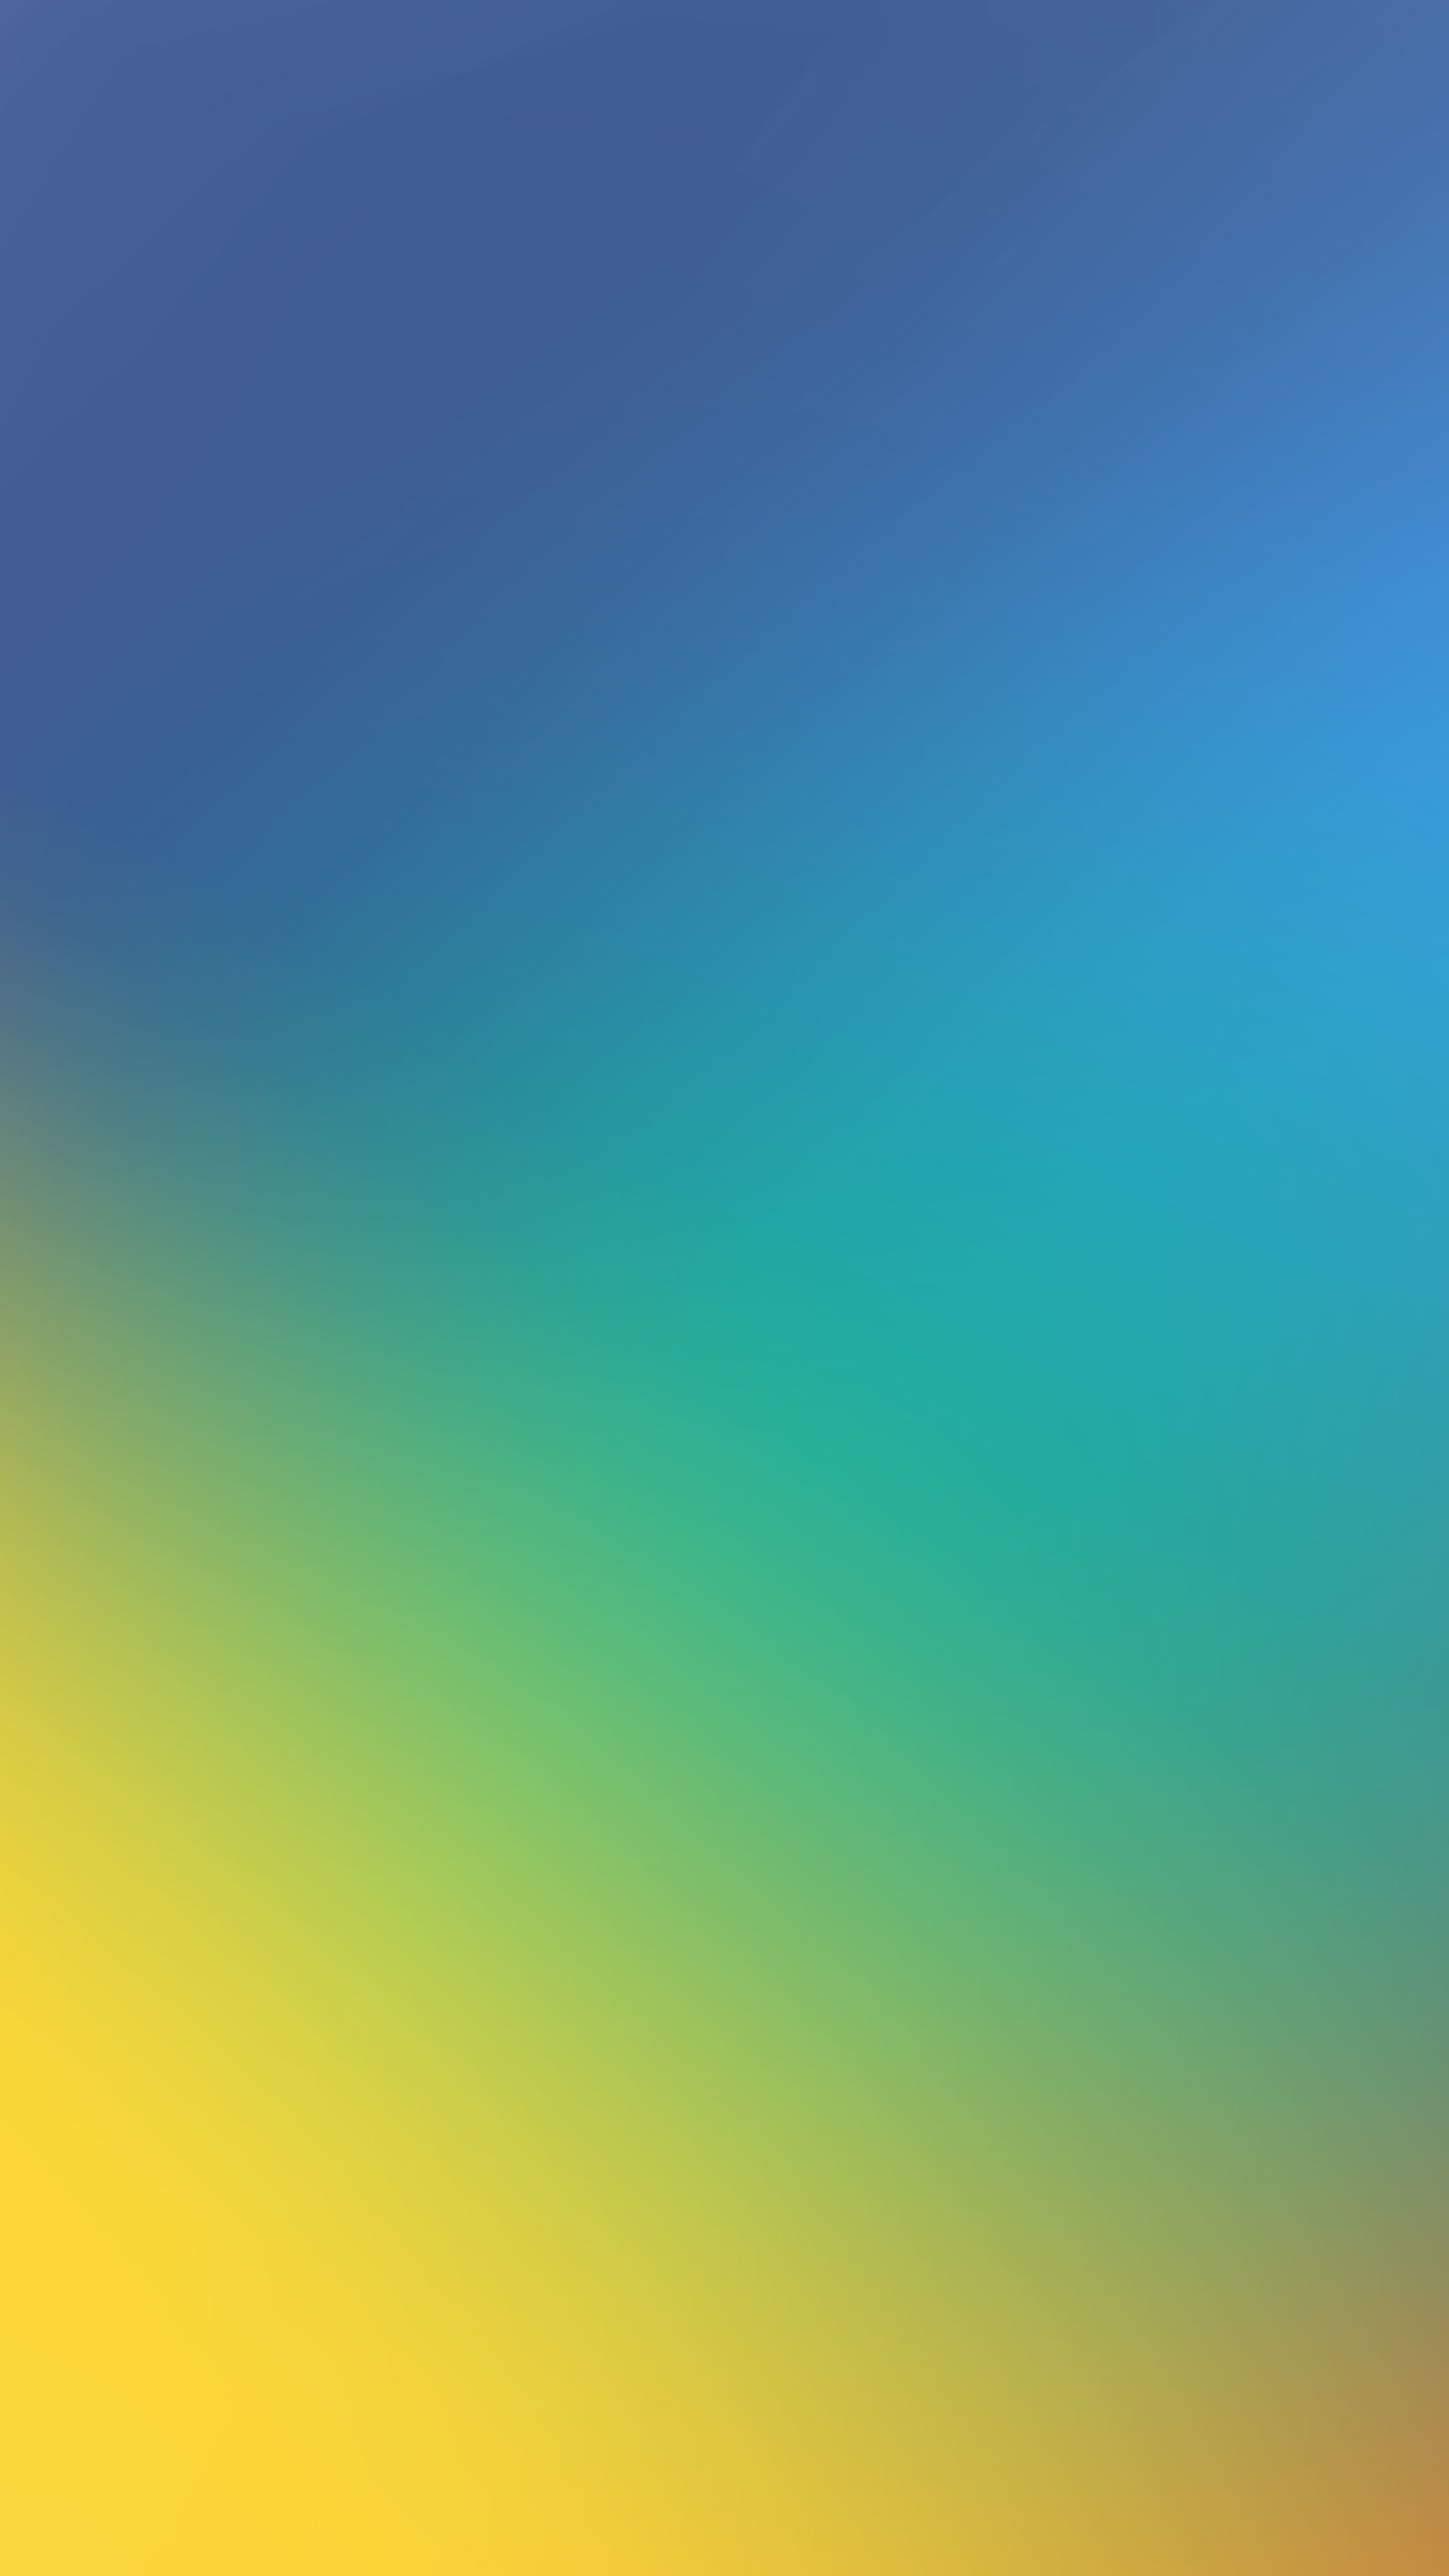 Download Blue Yellow Gradient Abstract 2160x3840 Wallpaper 4k Sony Xperia Z5 Premium Dual 2160x3840 Hd Image Background 1530